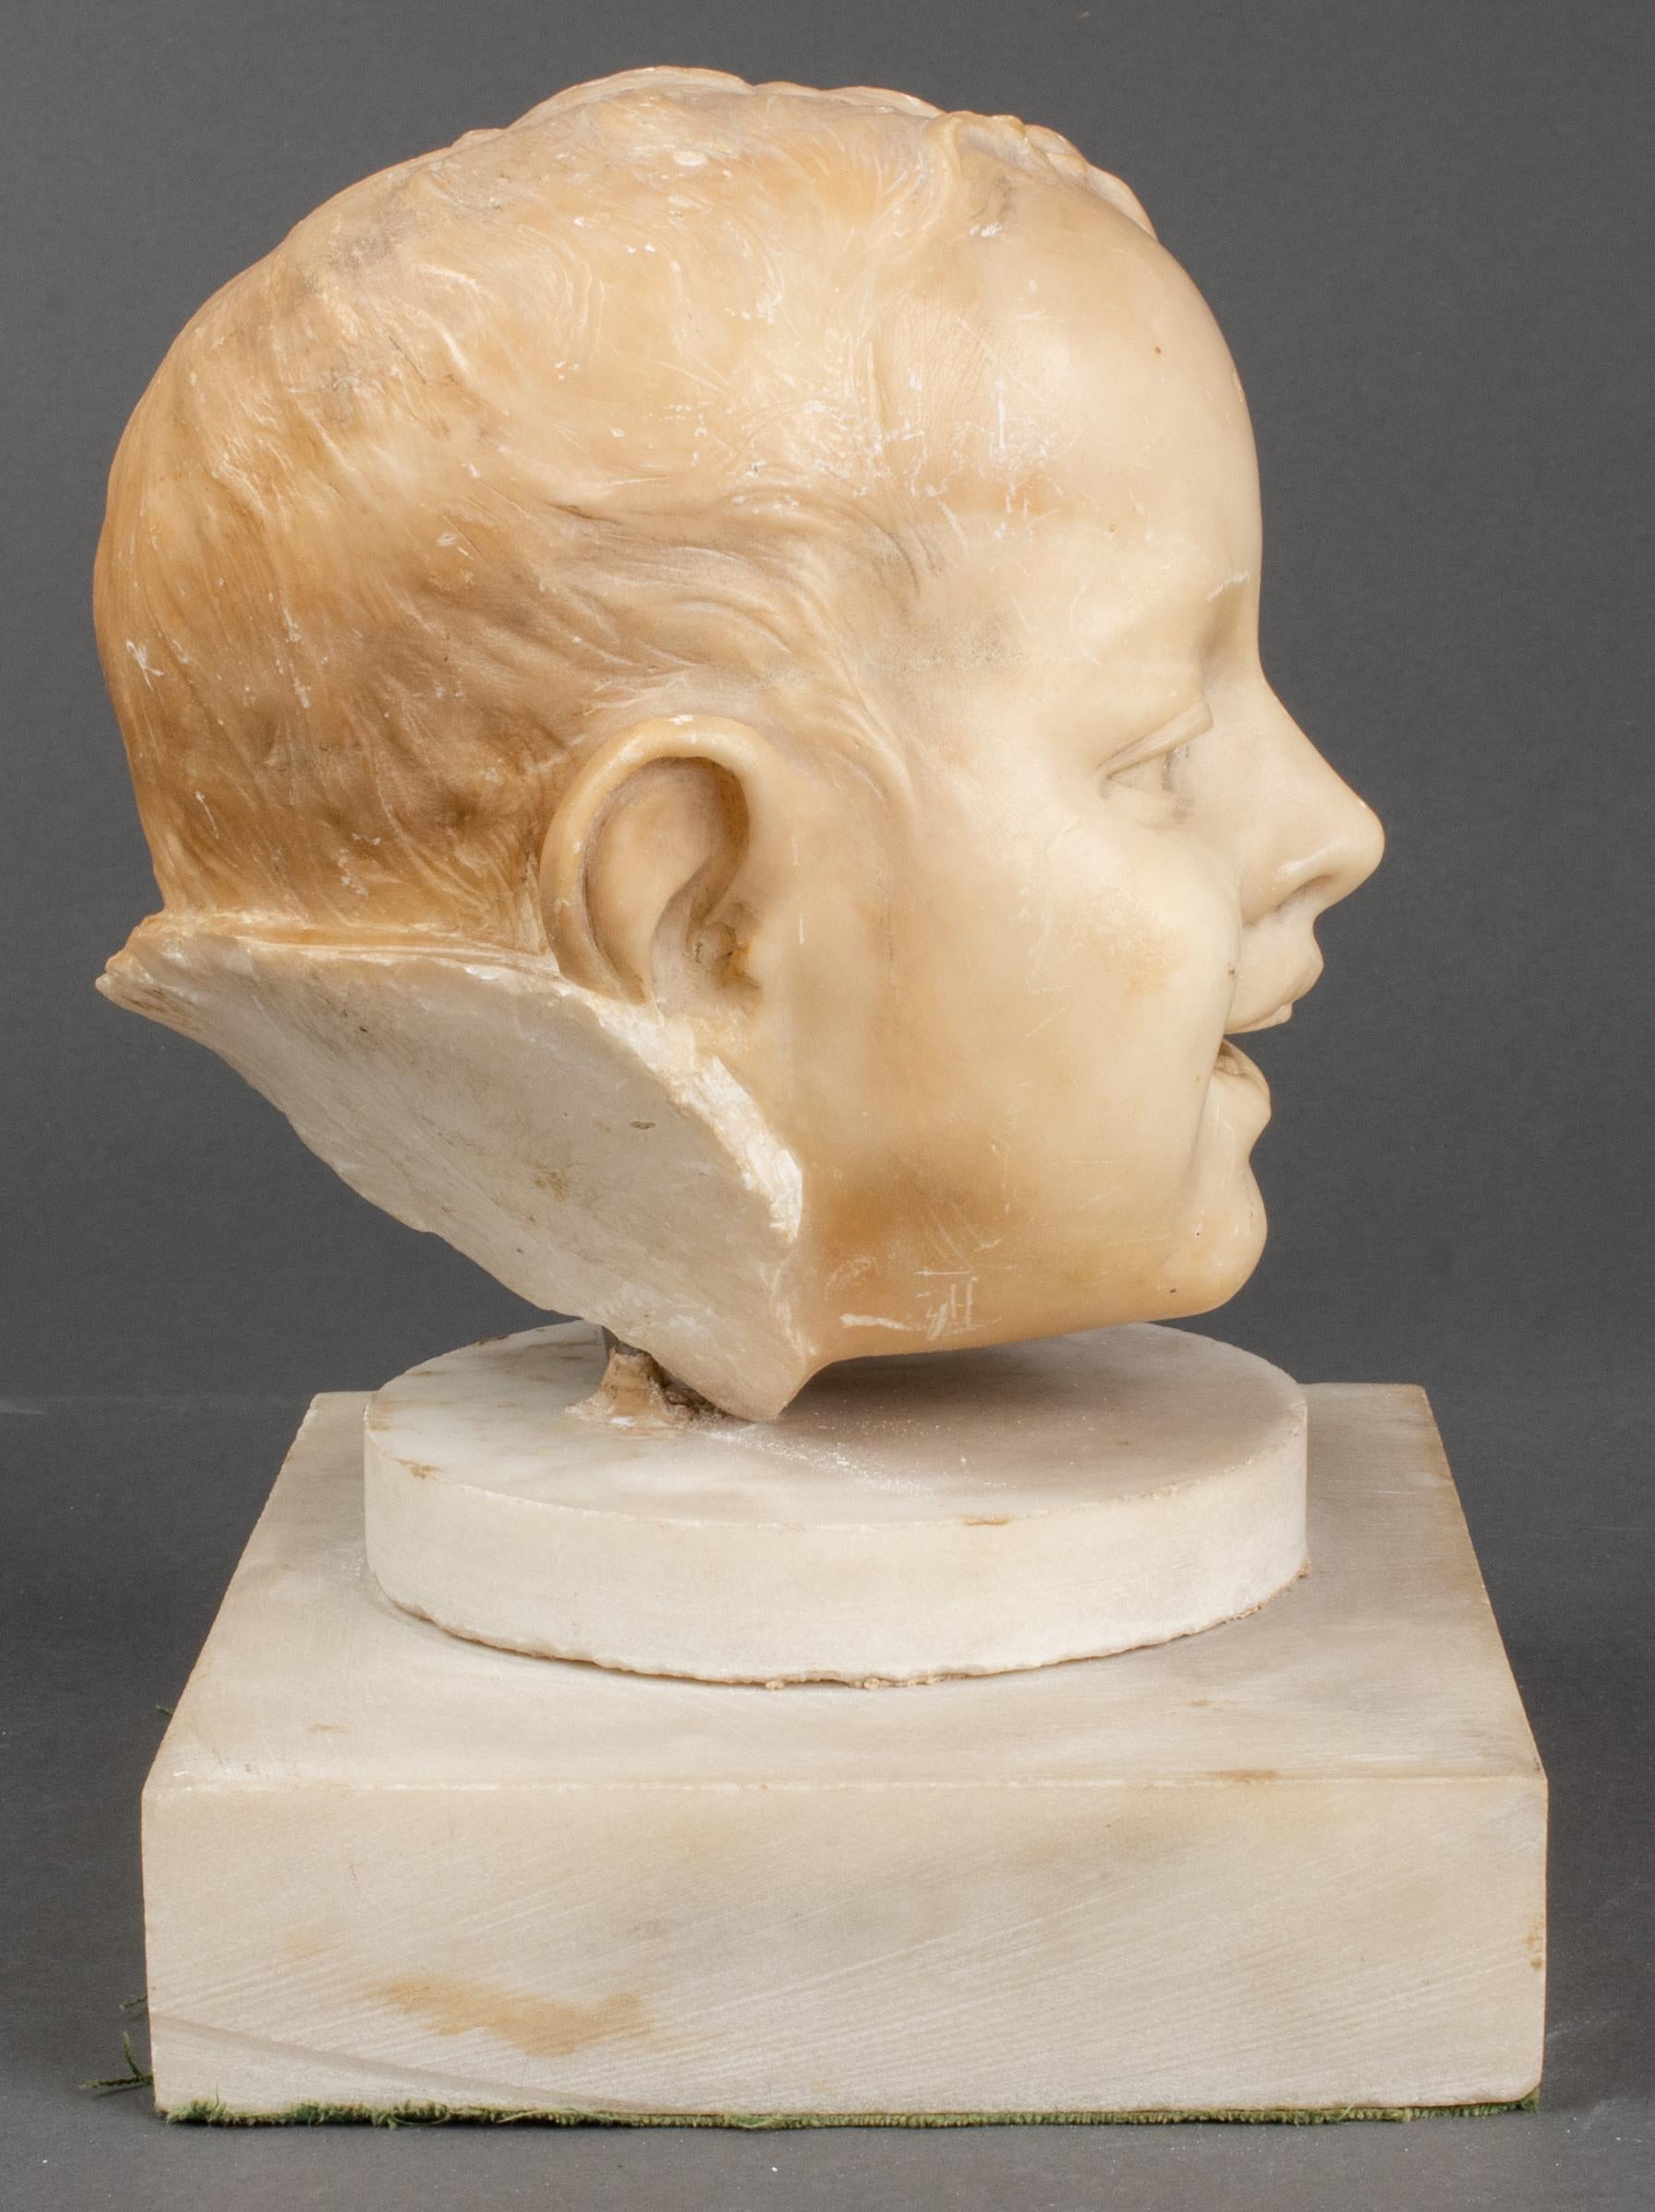 Carved marble fragment from a bust of a young boy, 20th century, his face depicted with a happy smile, unsigned, with associated white marble base. Measures: Bust 7.75” H x 6” W x 6.5” D, base 6.25